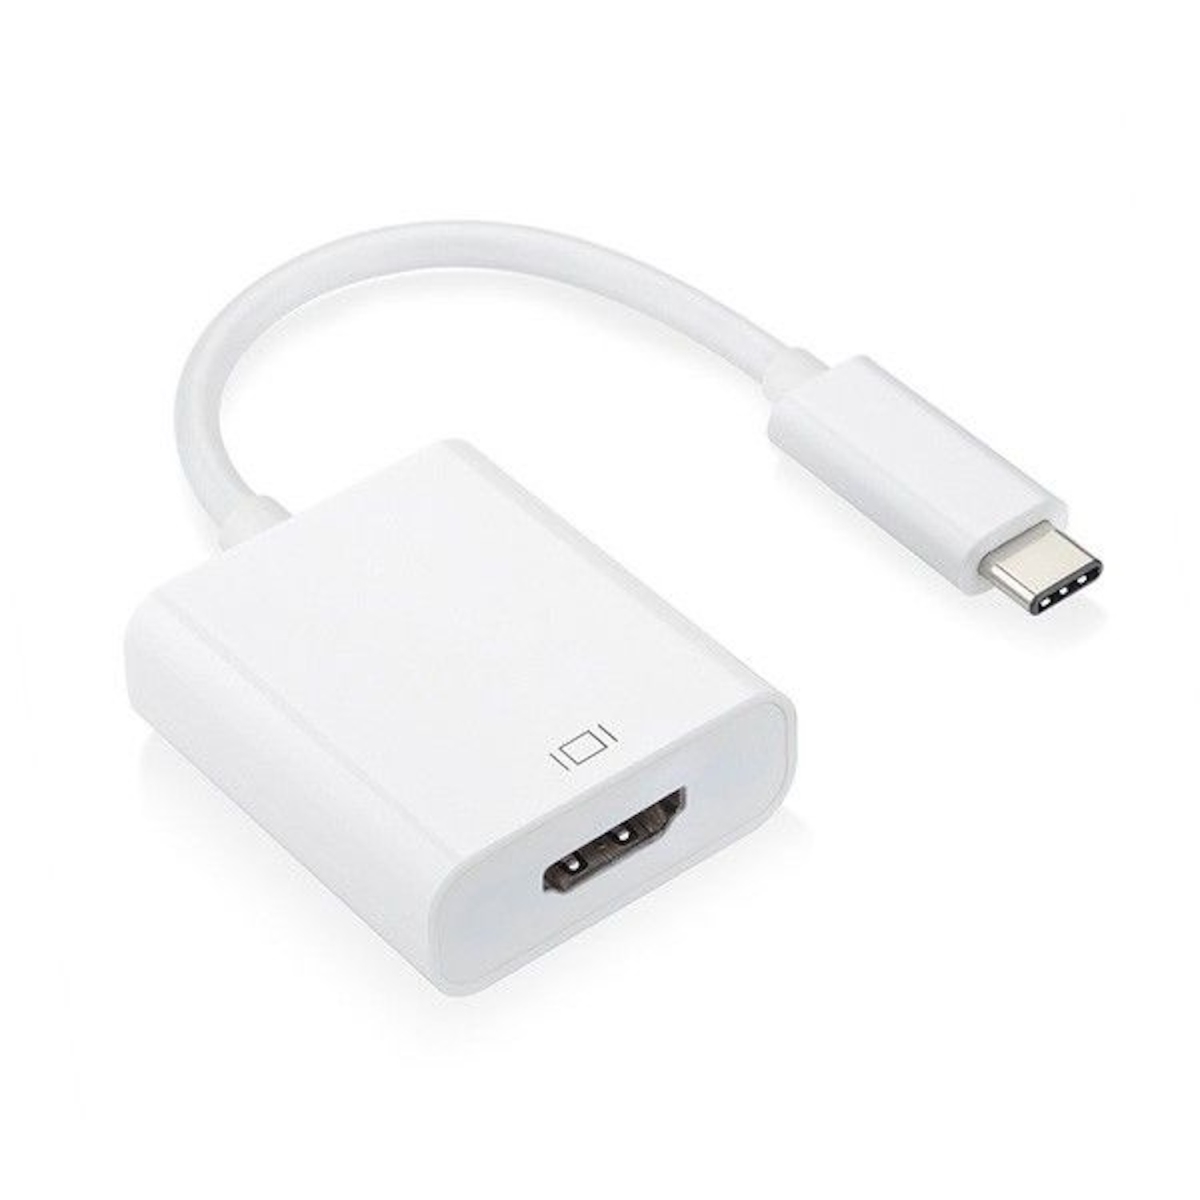 Picture of Sanoxy SNX-CBLR-UC201-8200 USB 3.1 Type C Male to HDMI Female Adapter - 4K&60Hz